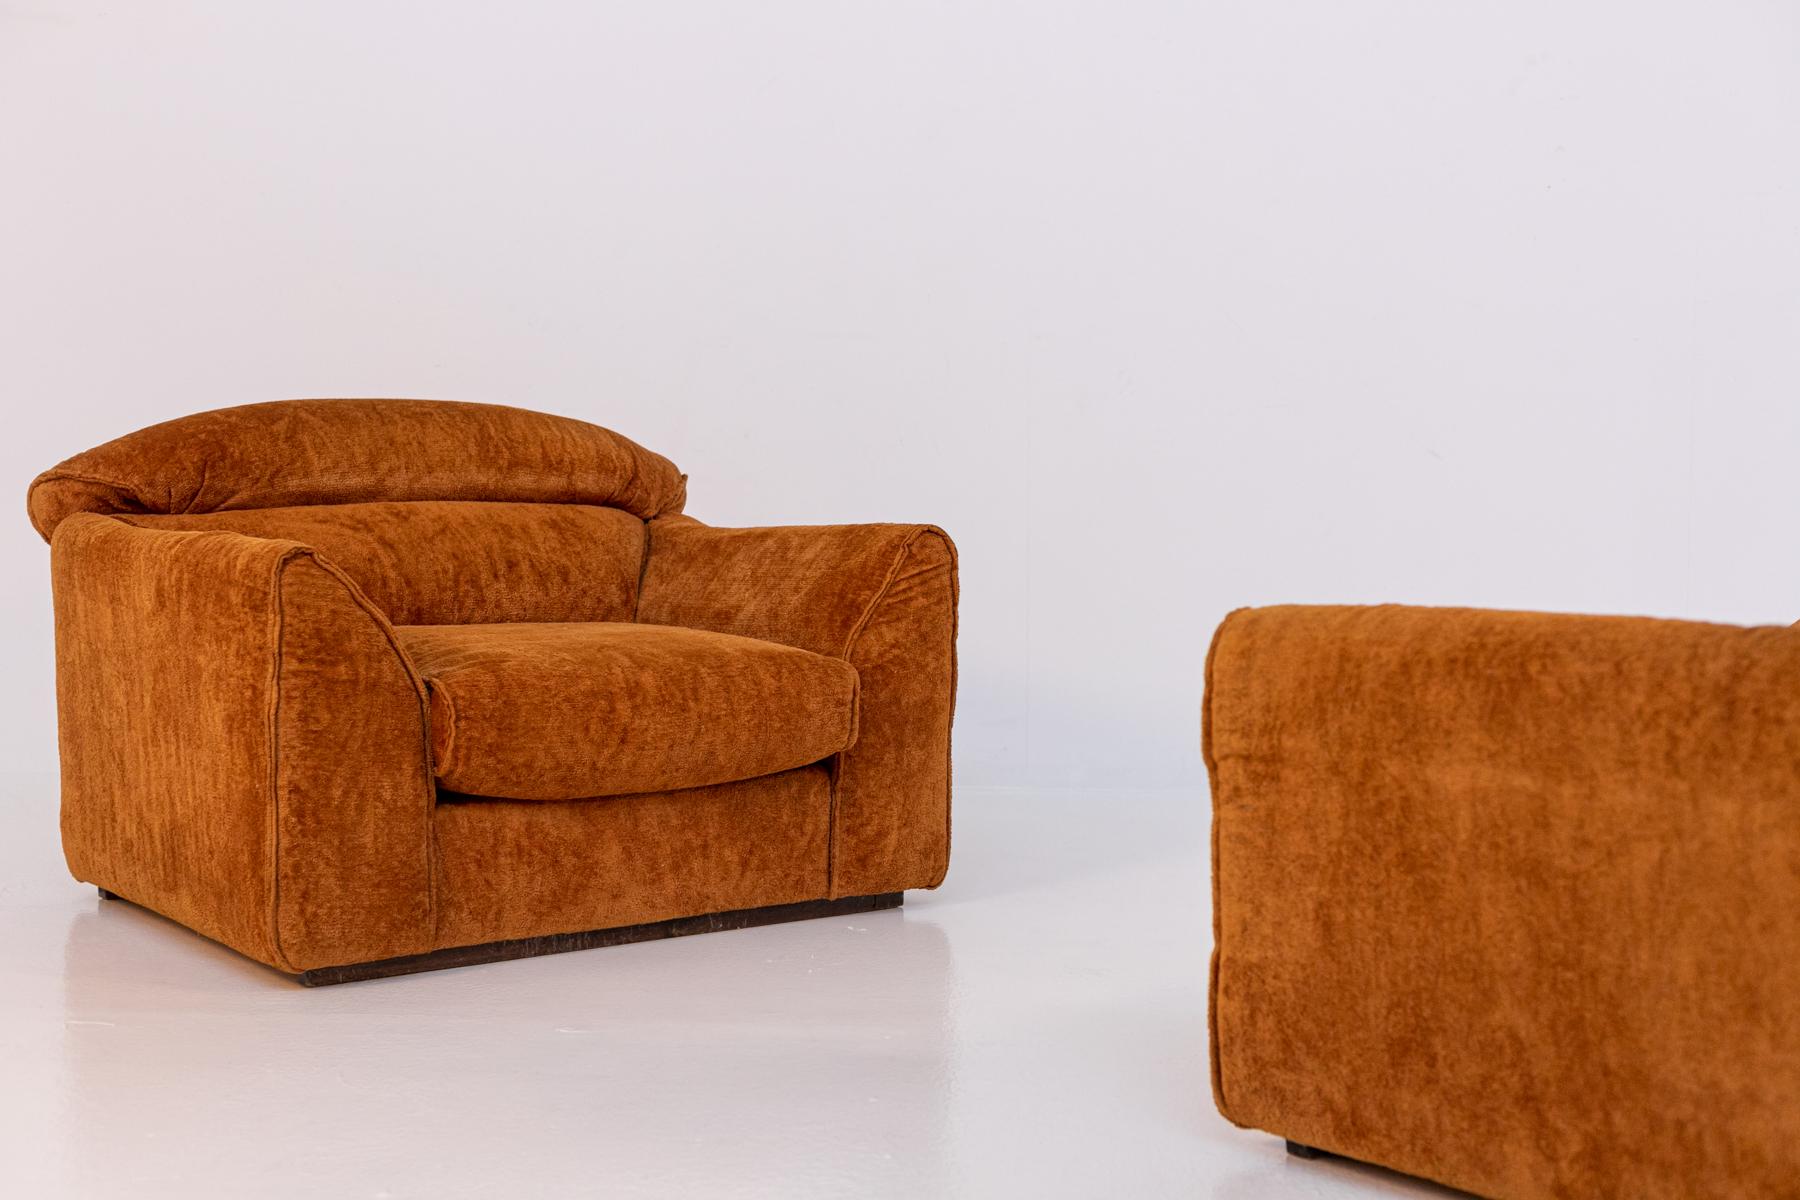 Gorgeous and rare pair of armchairs designed by D'Urbino, De Pas and Lomazzi in the 1970s. The armchairs are in original condition and are upholstered in dark orange velvet. Fine Italian workmanship, beautiful shape and absolute comfort for the